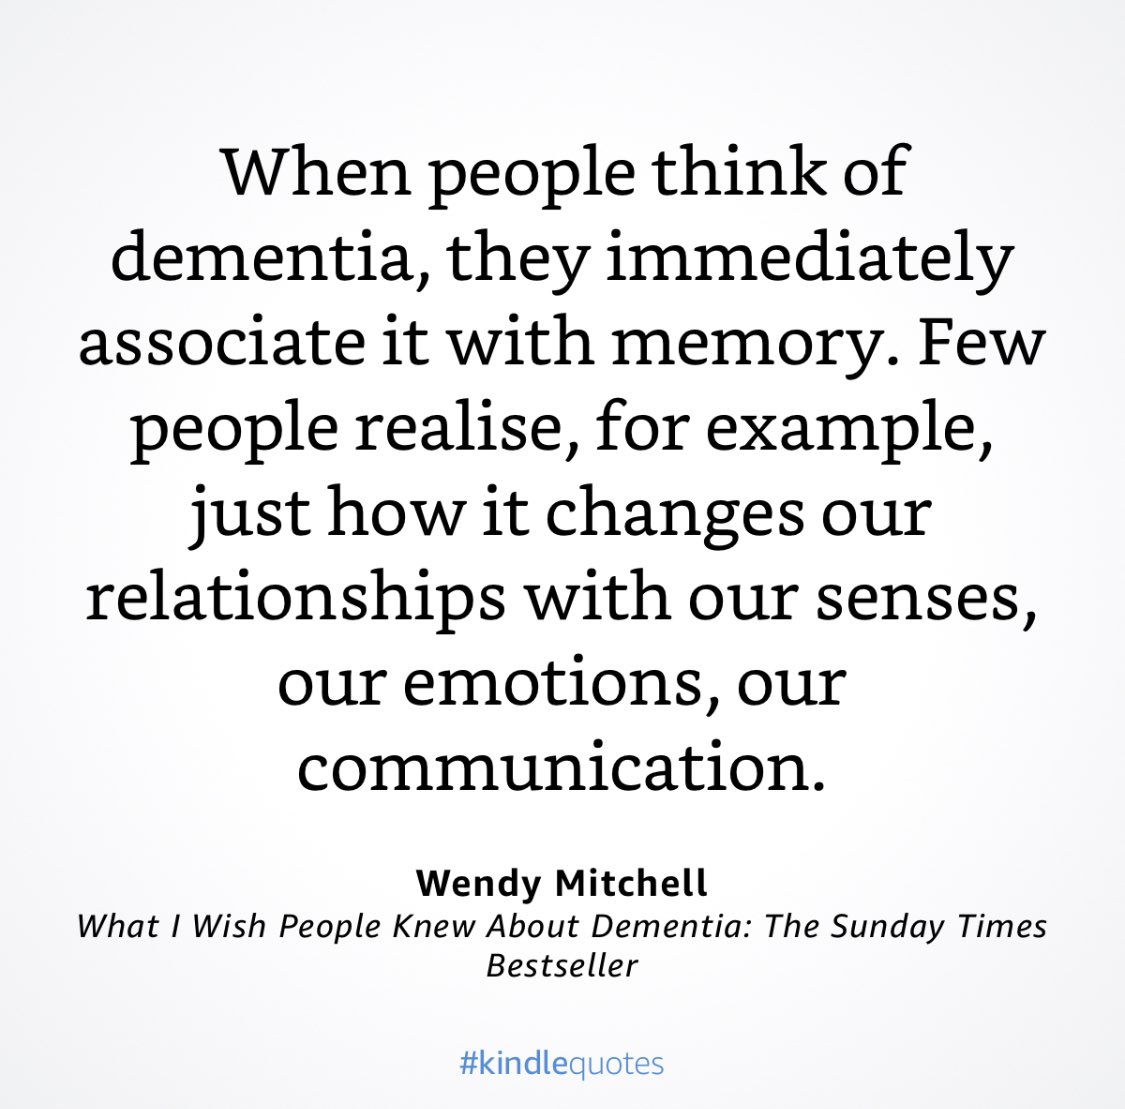 Whether early or late in the progression of the condition, dementia is about far more than just memory. A timely reminder from @WendyPMitchell in her book here. #GeriBookClub